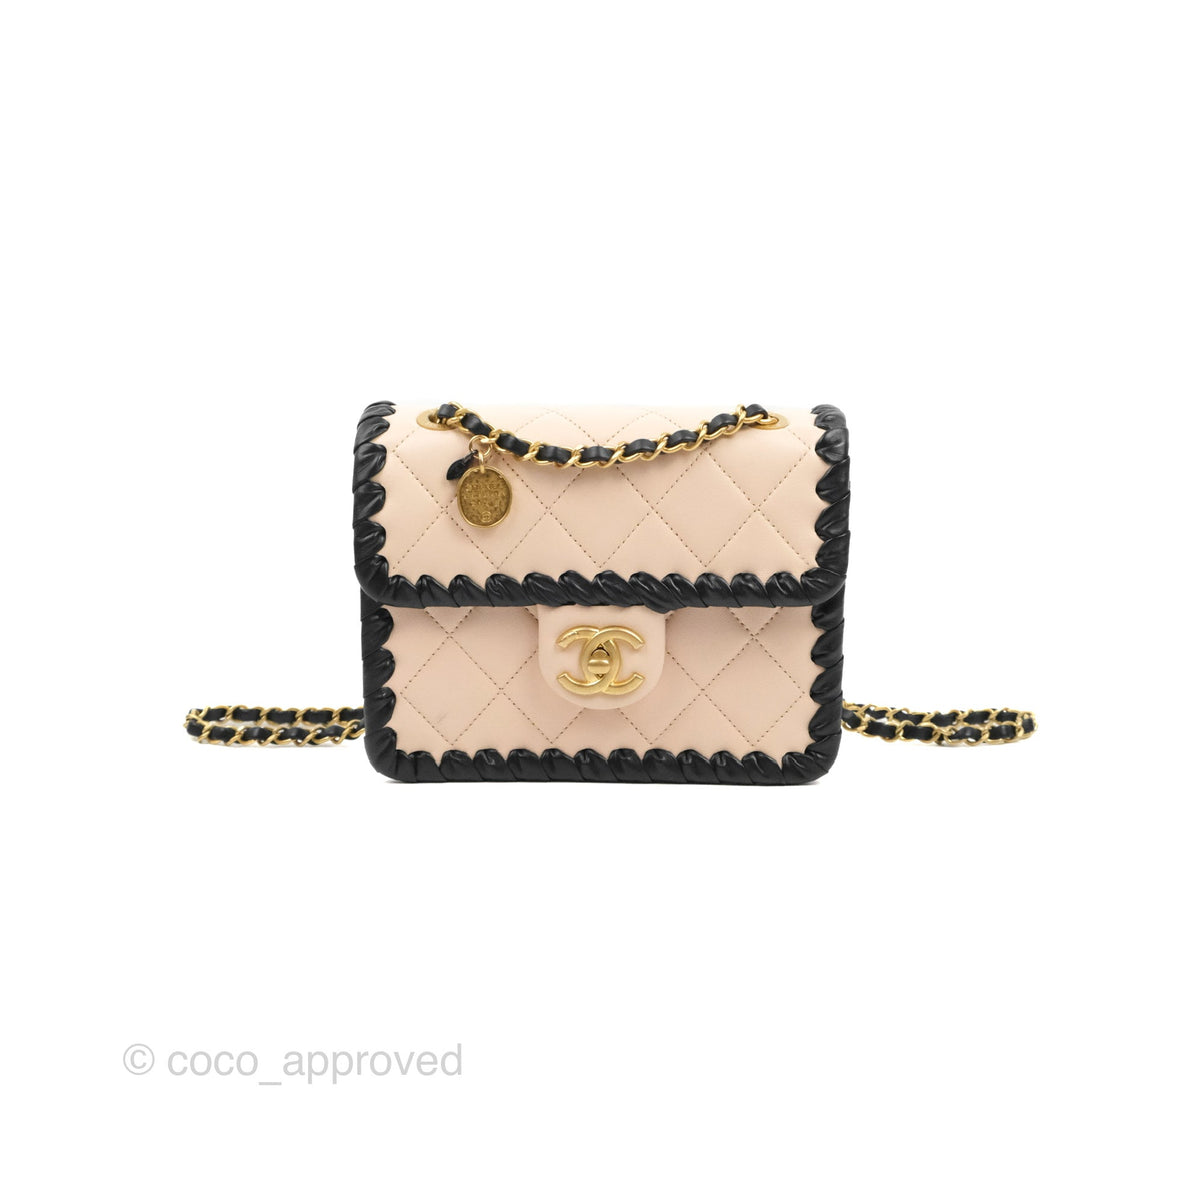 Graphic Flap Bag Quilted Calfskin Mini